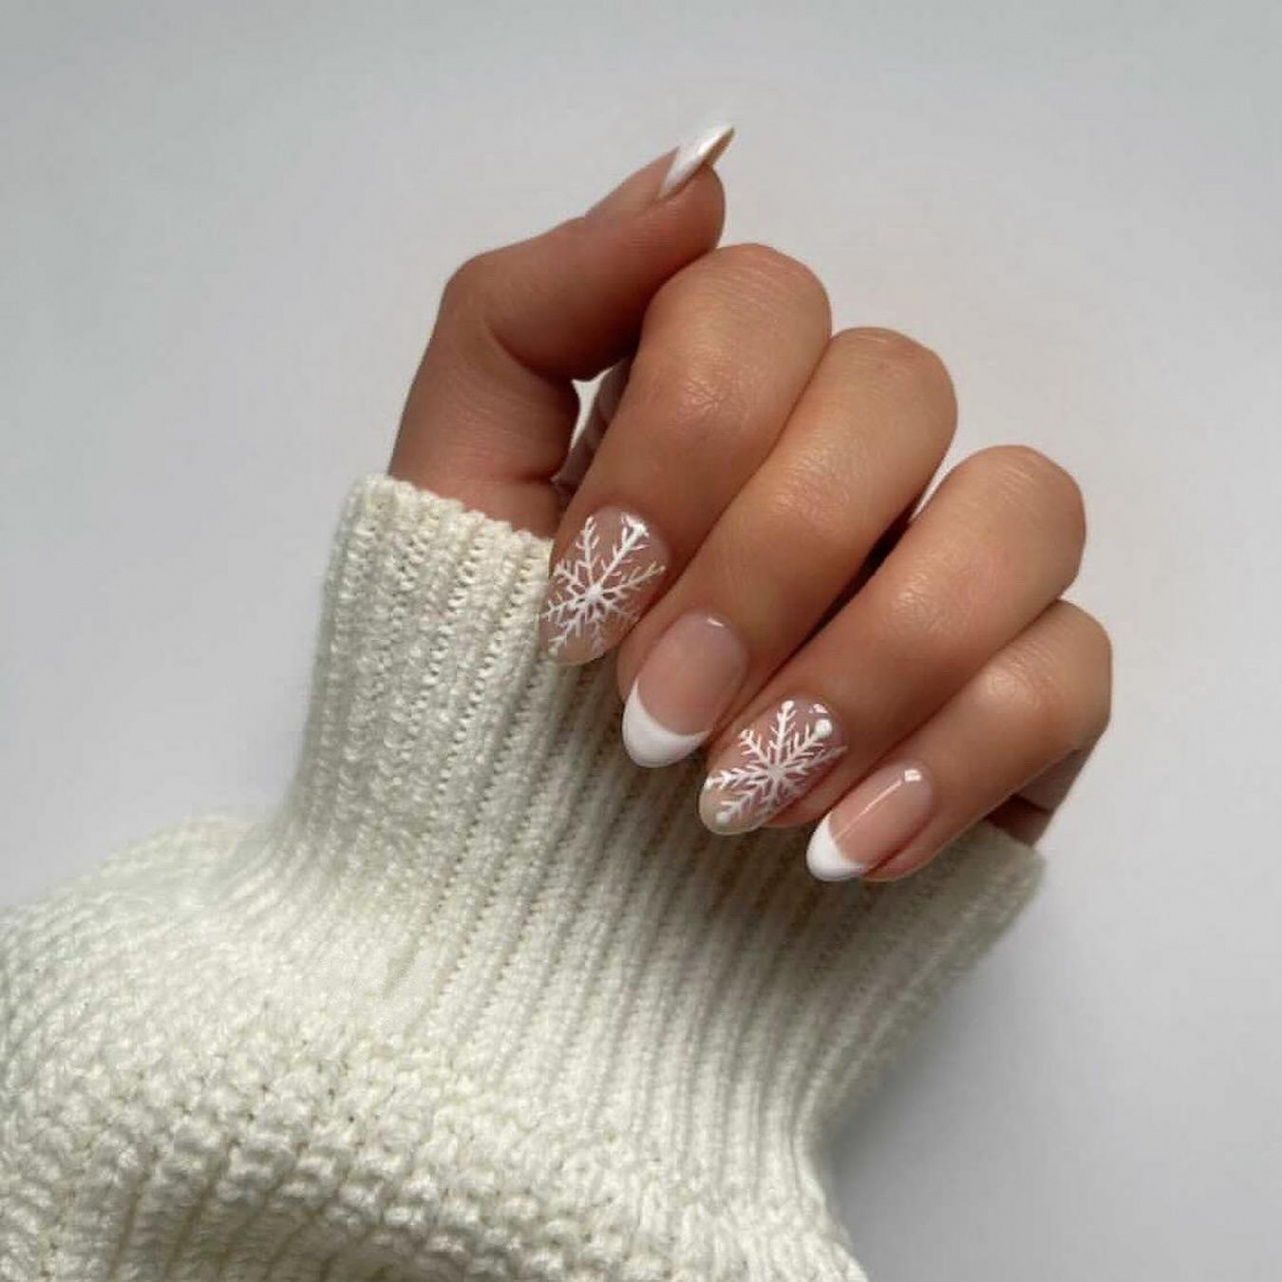 Holiday Nail Art Ideas For A Festive Manicure – Maniology